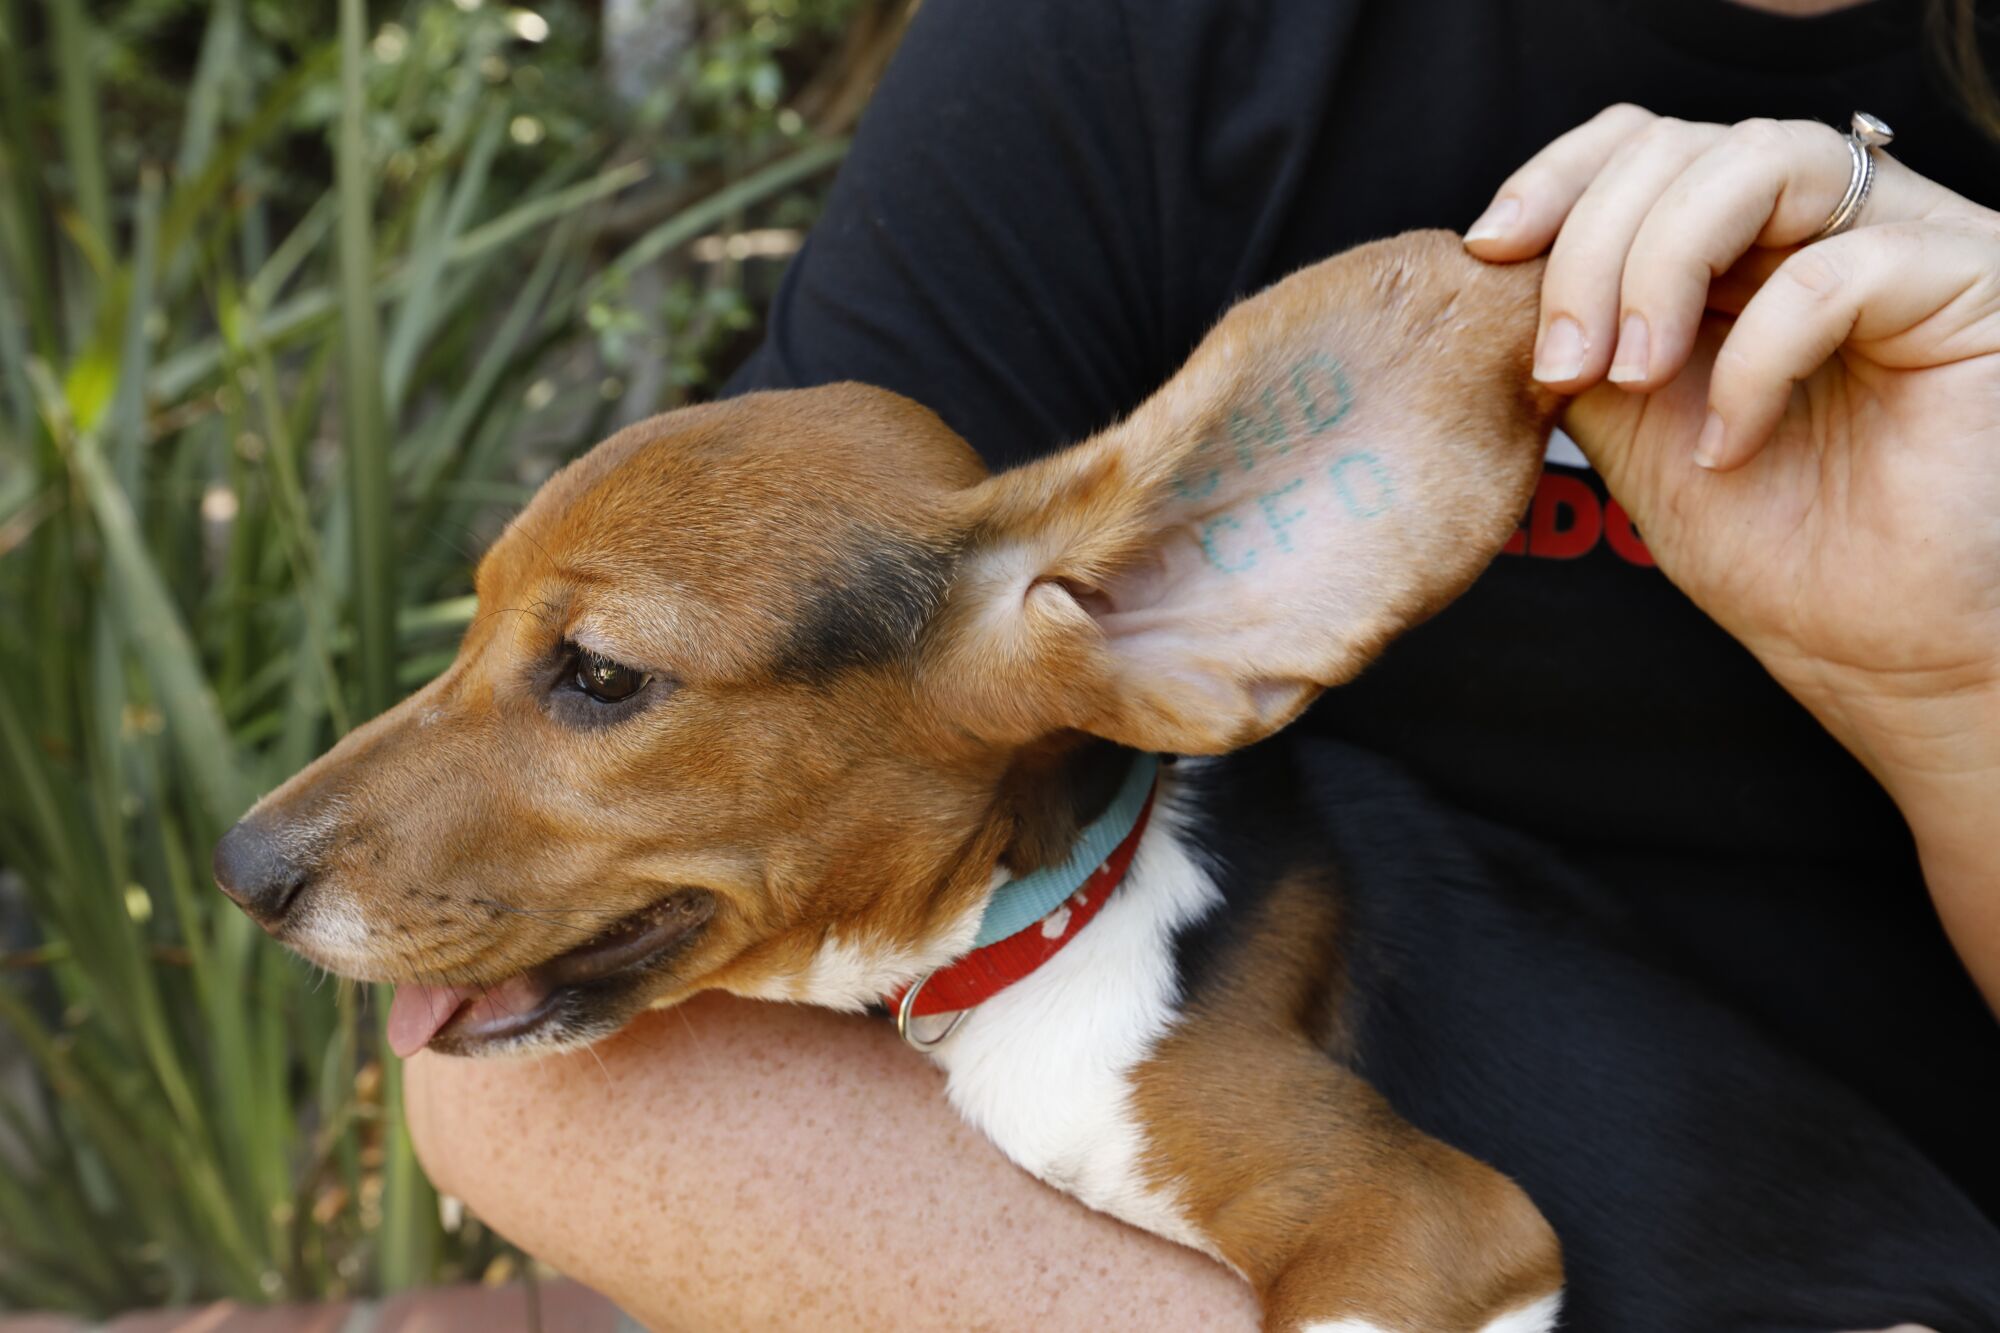 A beagle used for testing bears six-letter serial numbers tattooed on the insides of their ears.